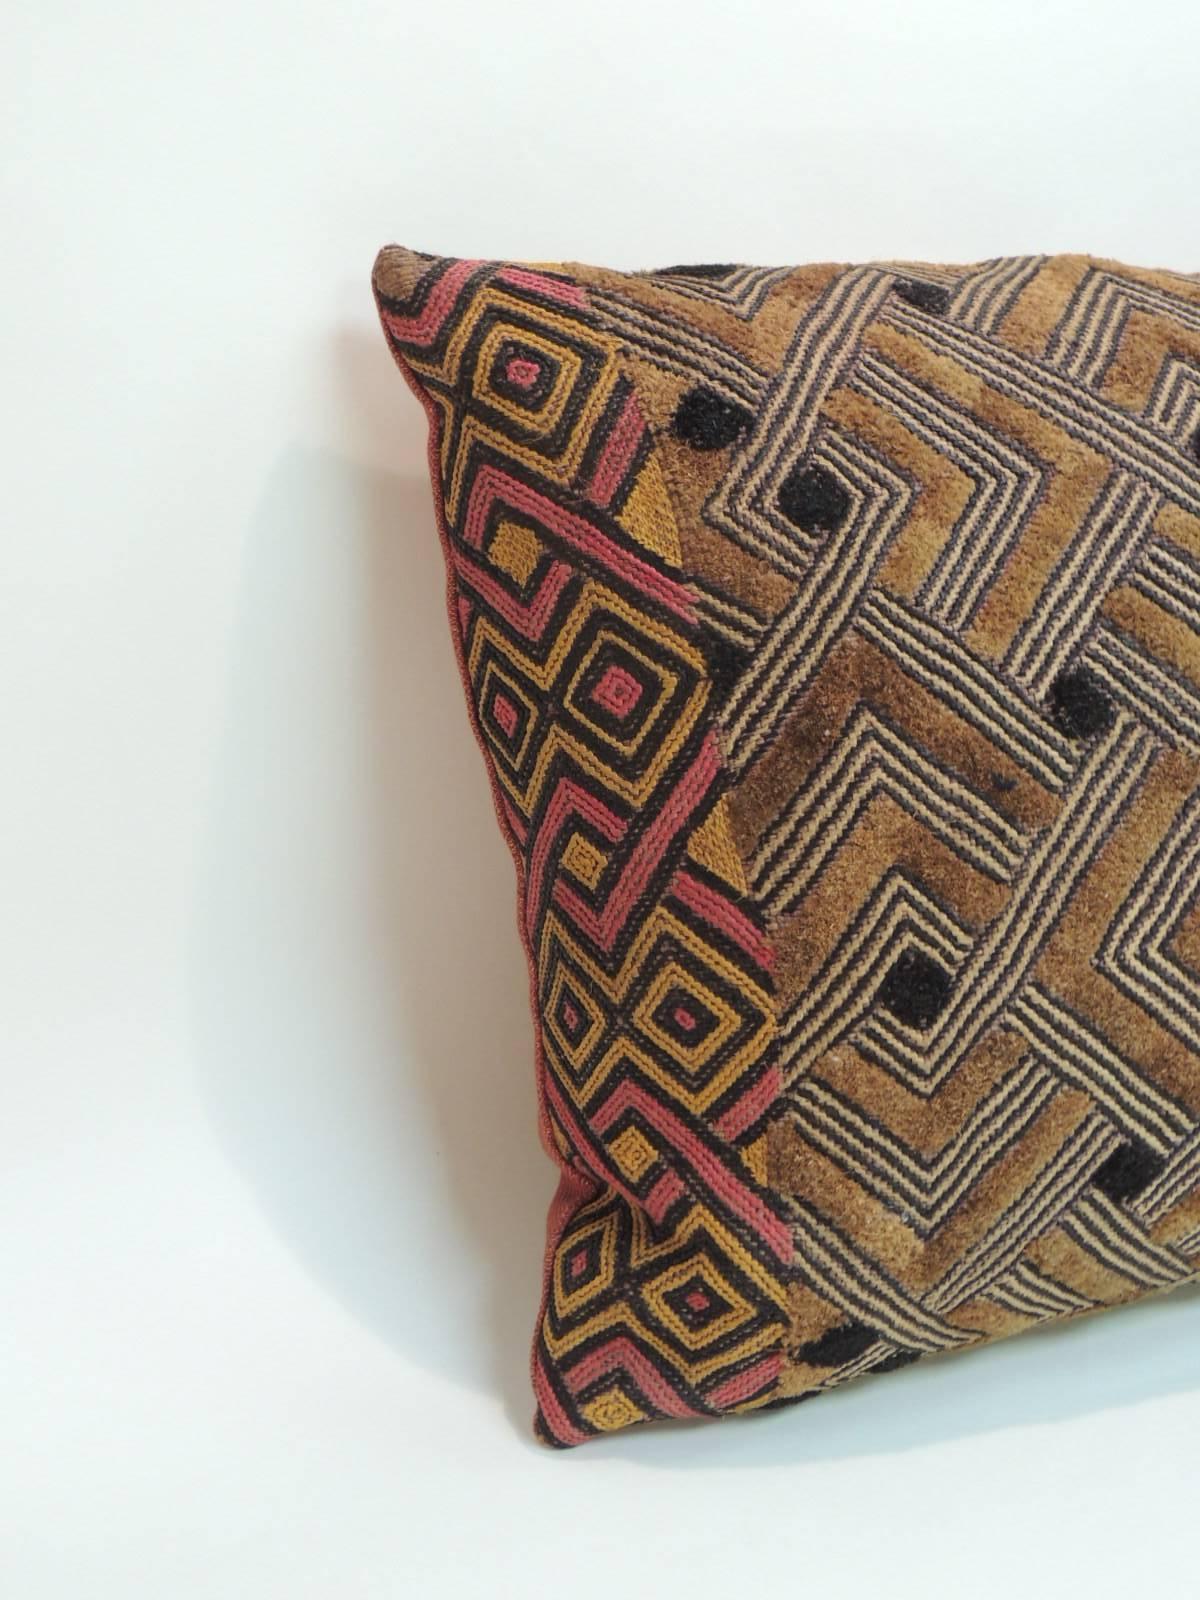 1920’s African Kuba Shoowa or Kasai velvet lumbar pillow with tribal design in shades of red, yellow, black and brown with textured red linen in the back. African textured tribal and artisanal textile on both of the accent Boho-chic style pillows. 